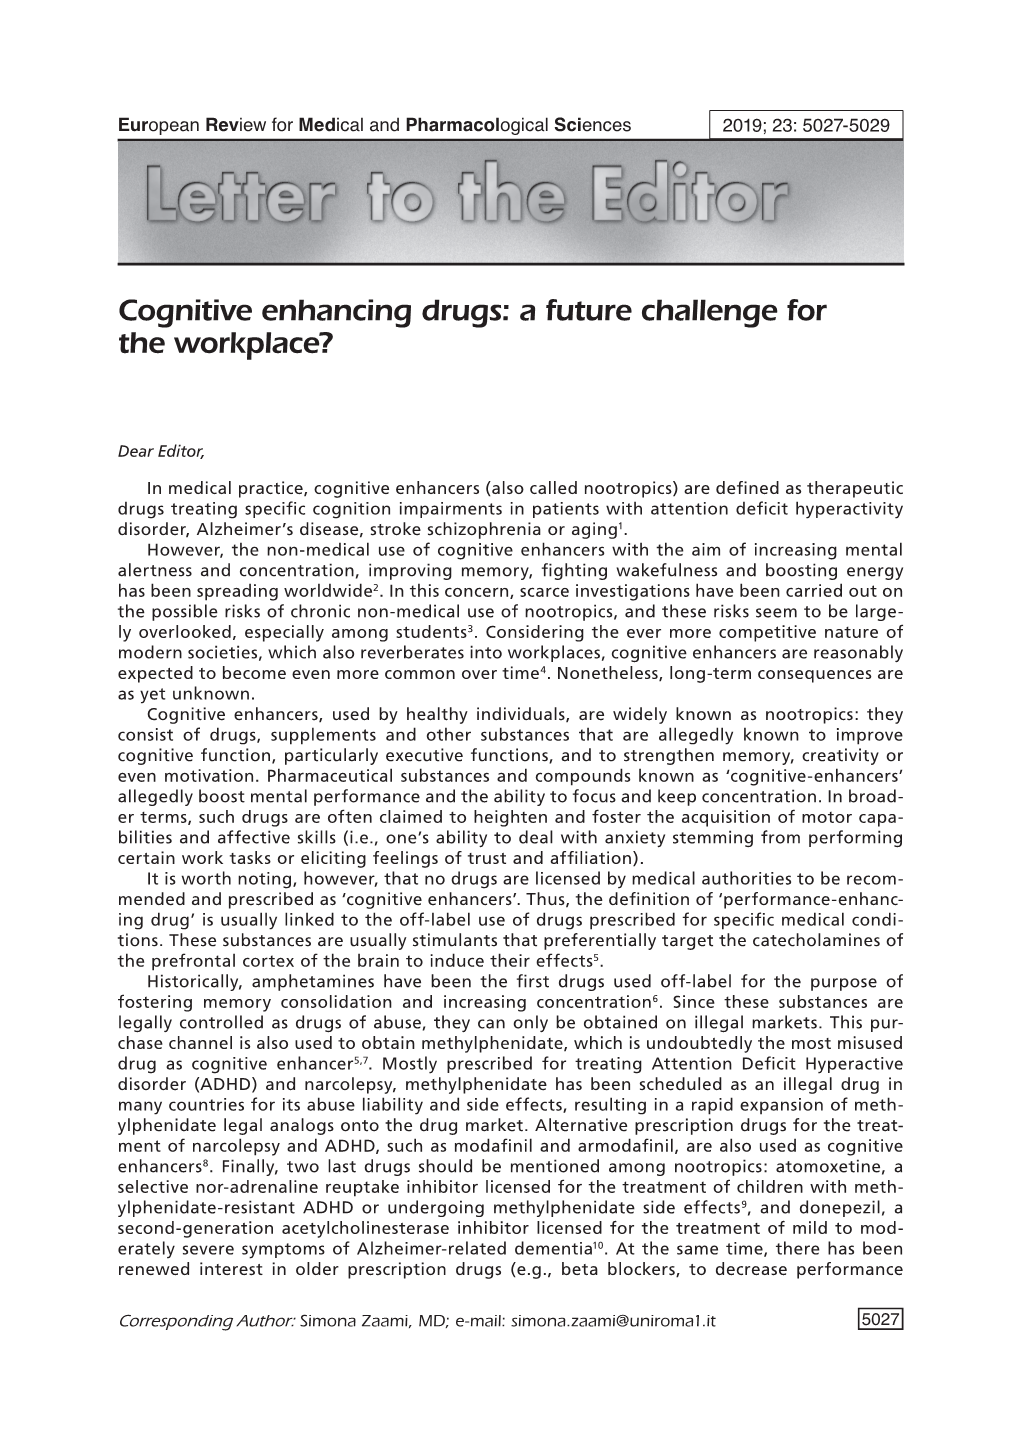 Cognitive Enhancing Drugs: a Future Challenge for the Workplace?